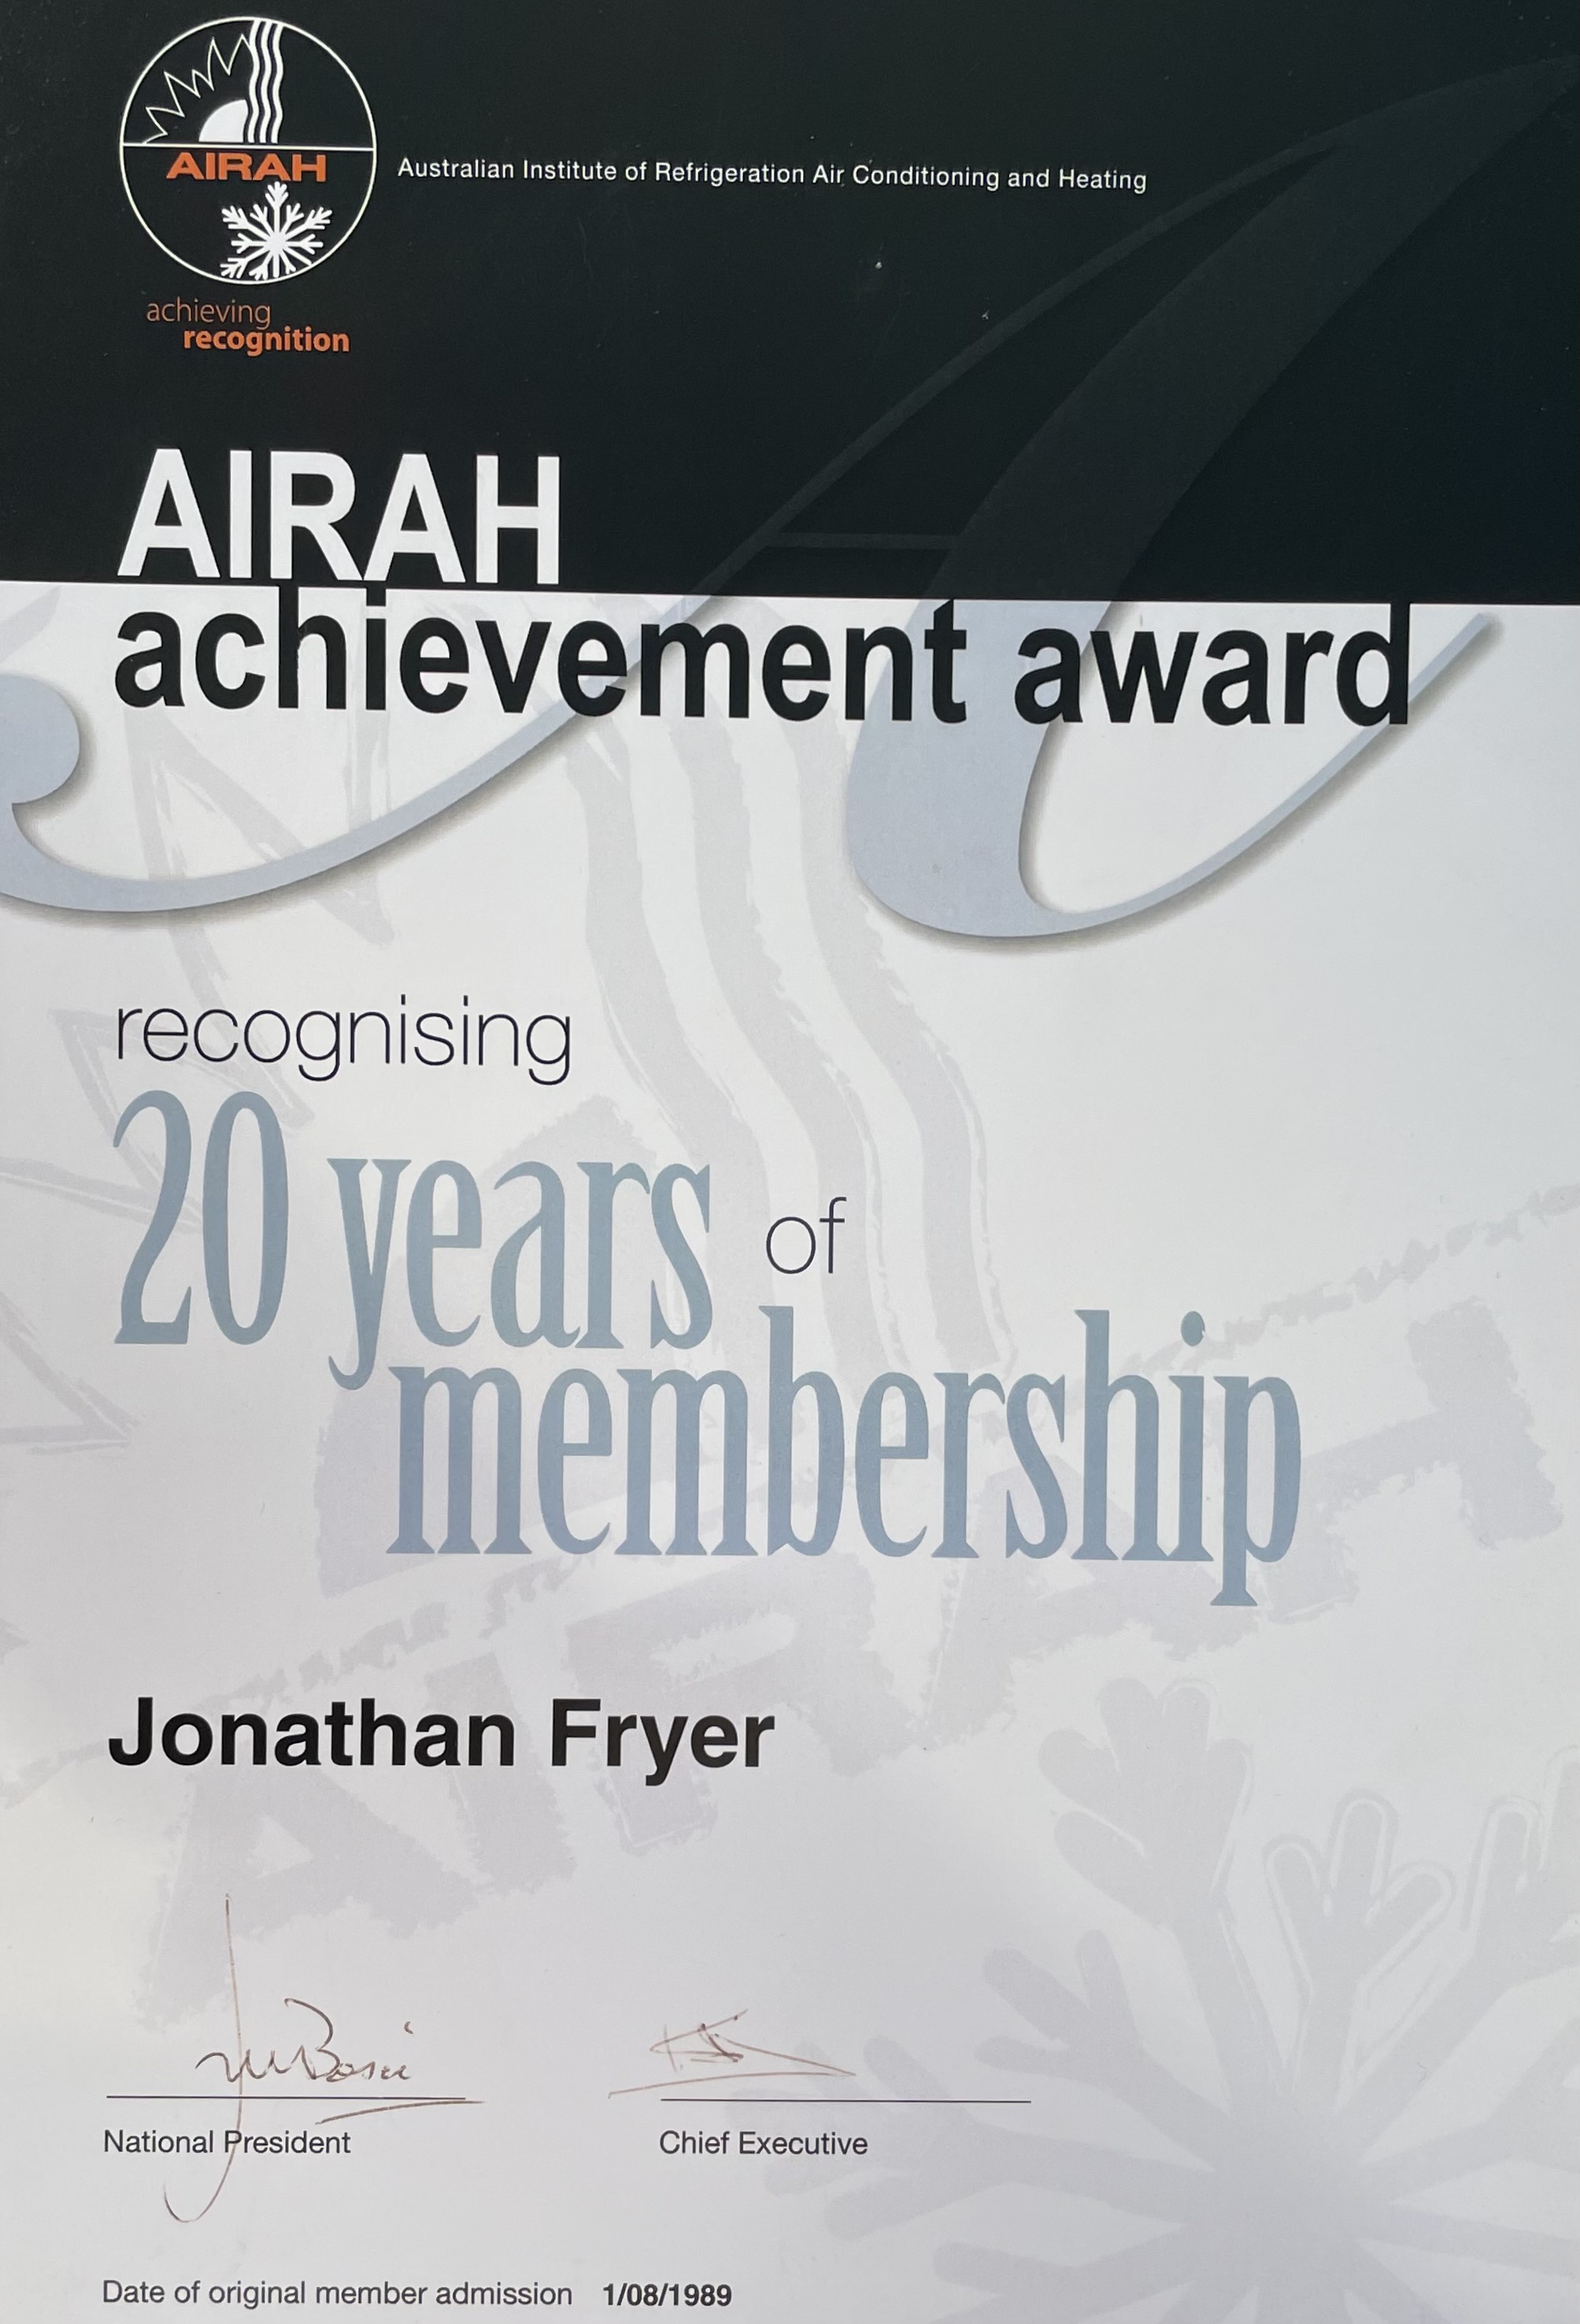 Award from the Australian Institute of Refrigeration Air Conditioning and Heating to Jonathan Fryer for 20 years of membership